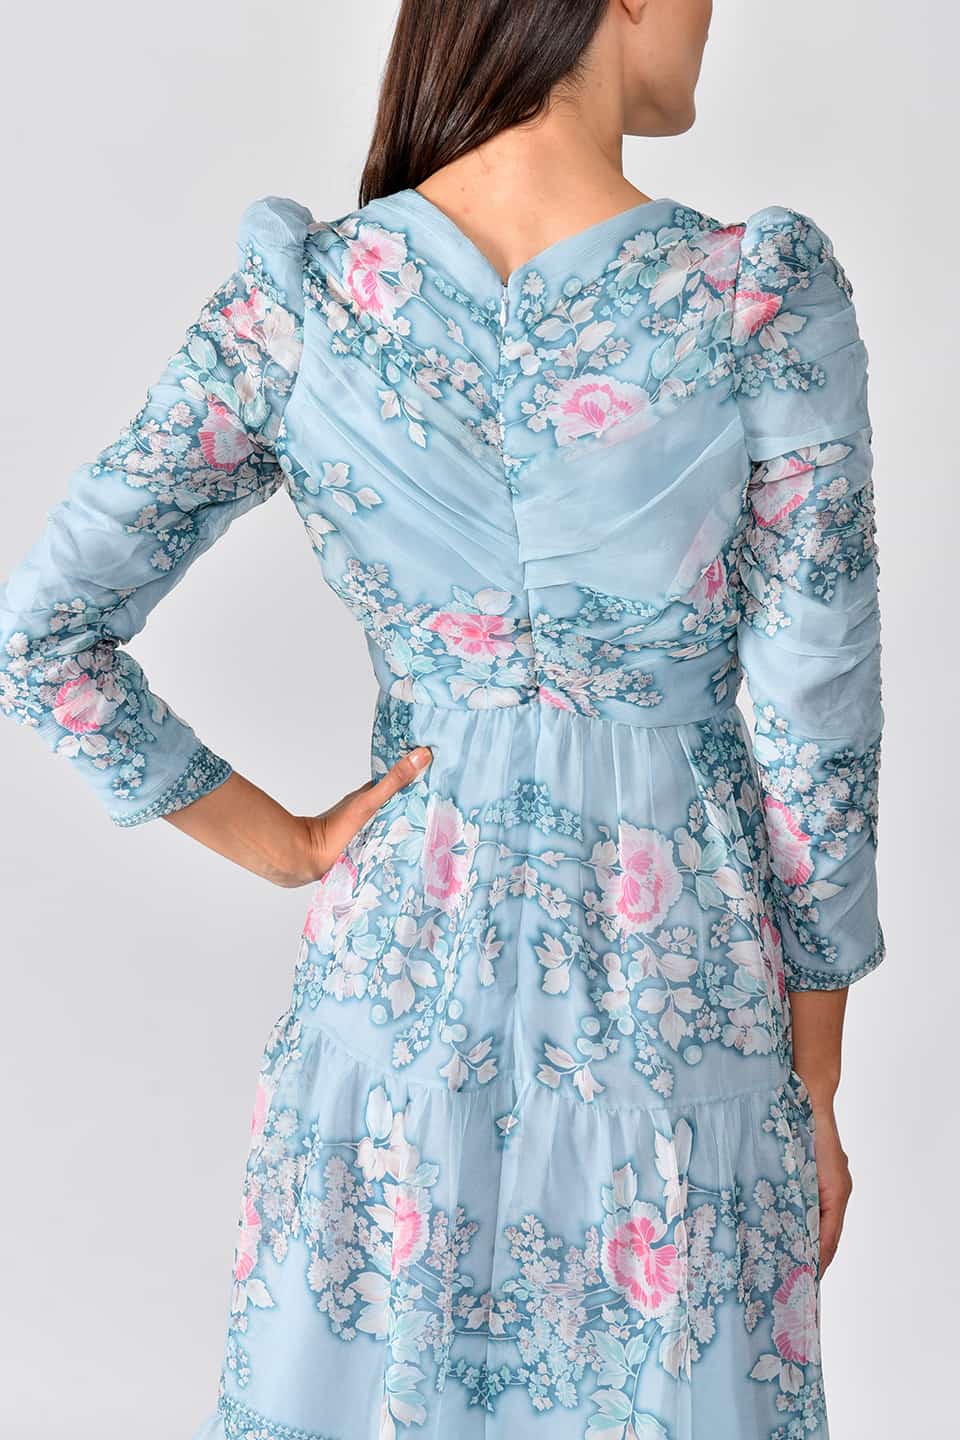 Thumbnail for Product gallery 8, Model wearing floral print silk chiffon tiered long dress in a pale blue color from stylist Vilshenho, posing from behind